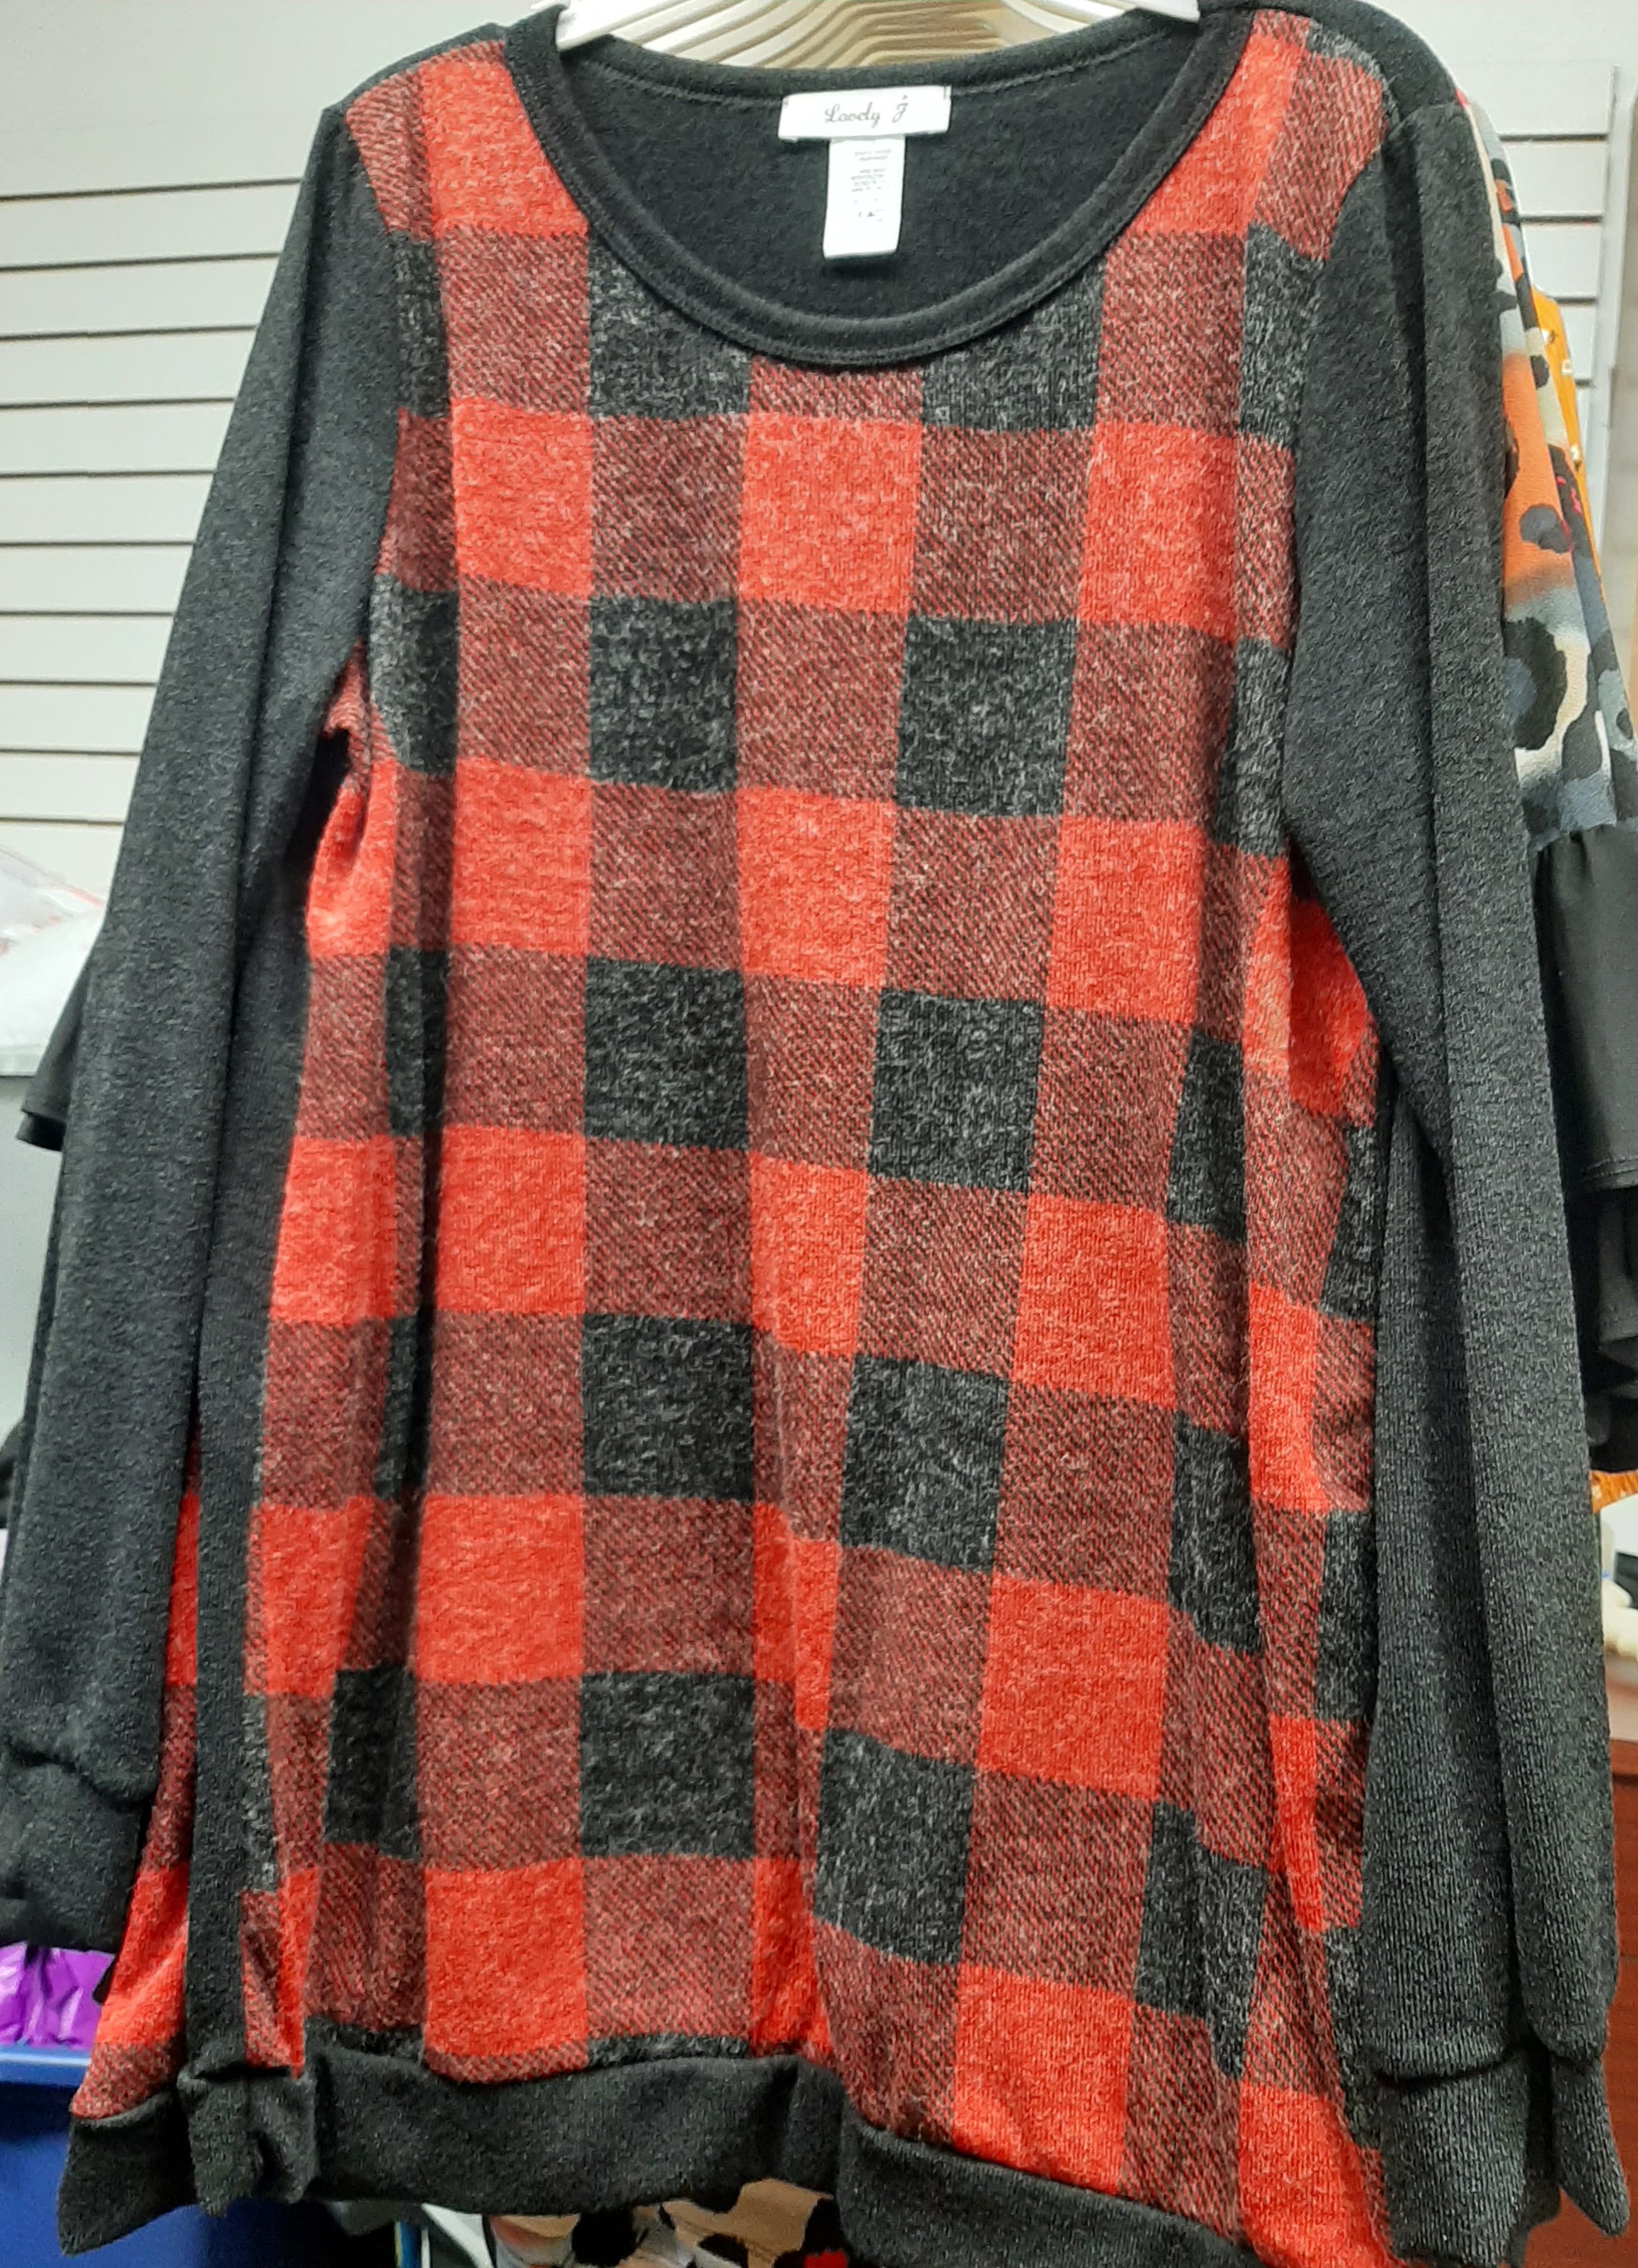 Black & Red Plaid Sweatery Shirt Top